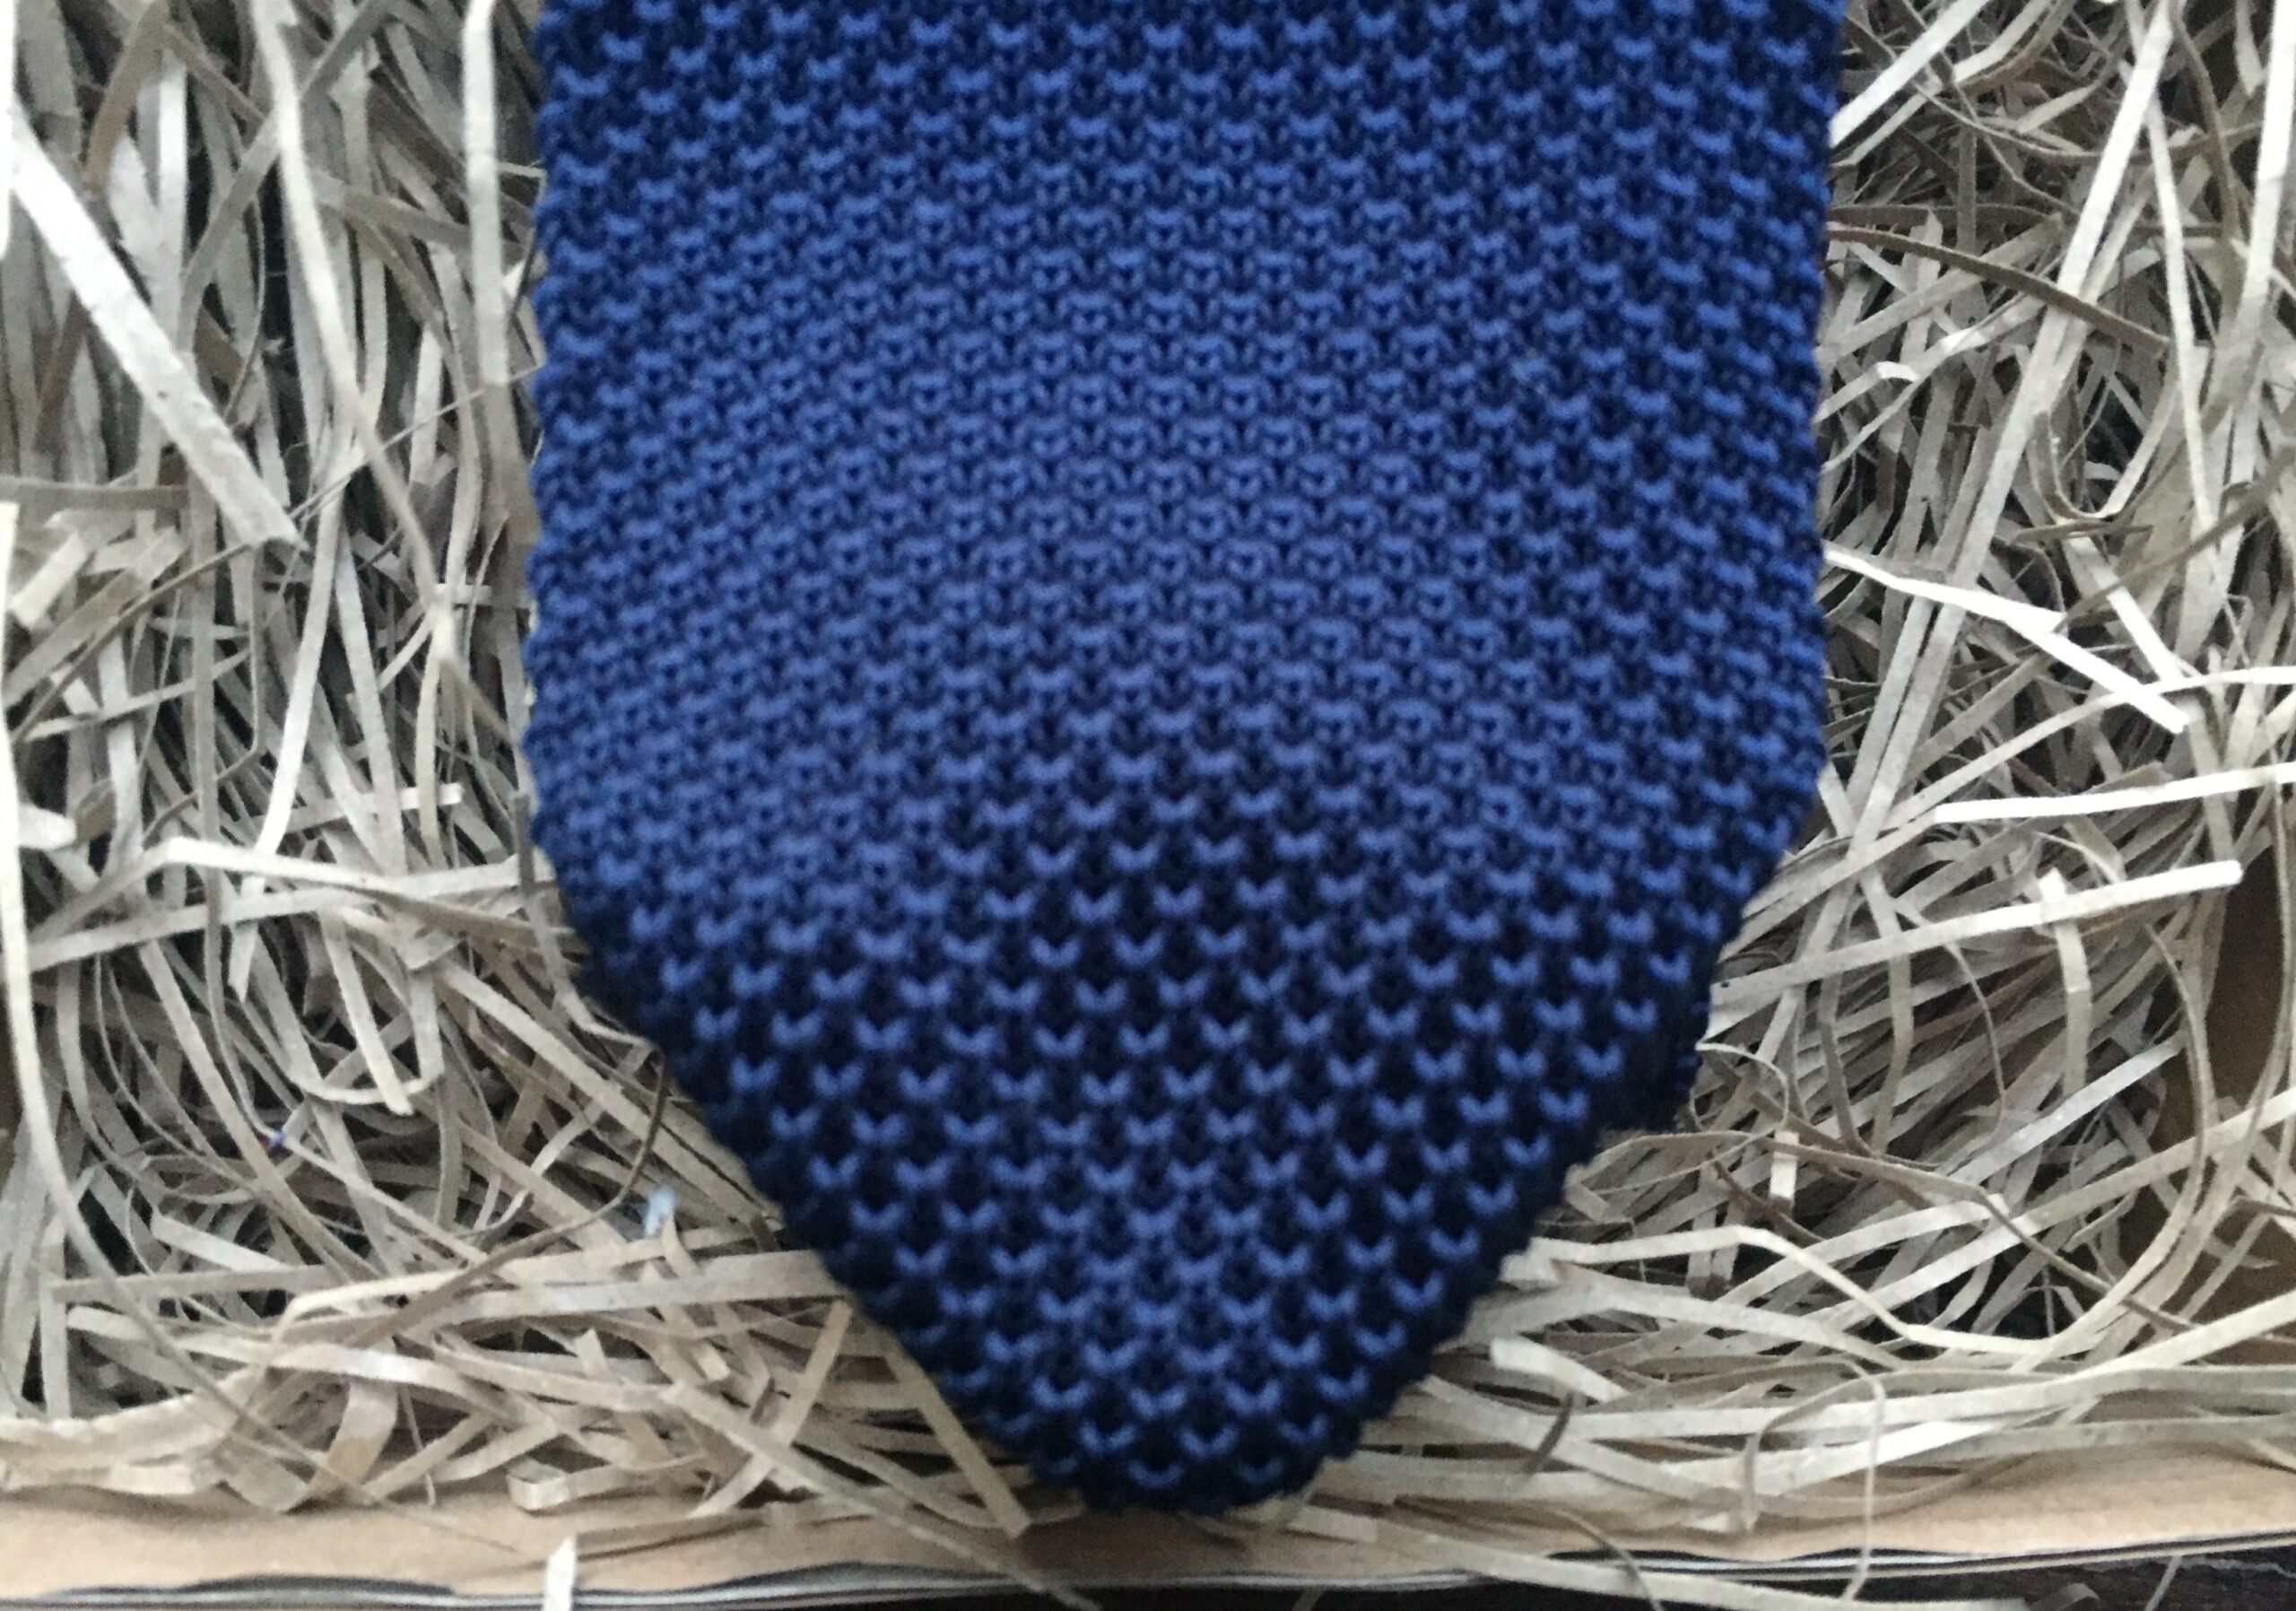 A photo of a navy blue knitted mens tie